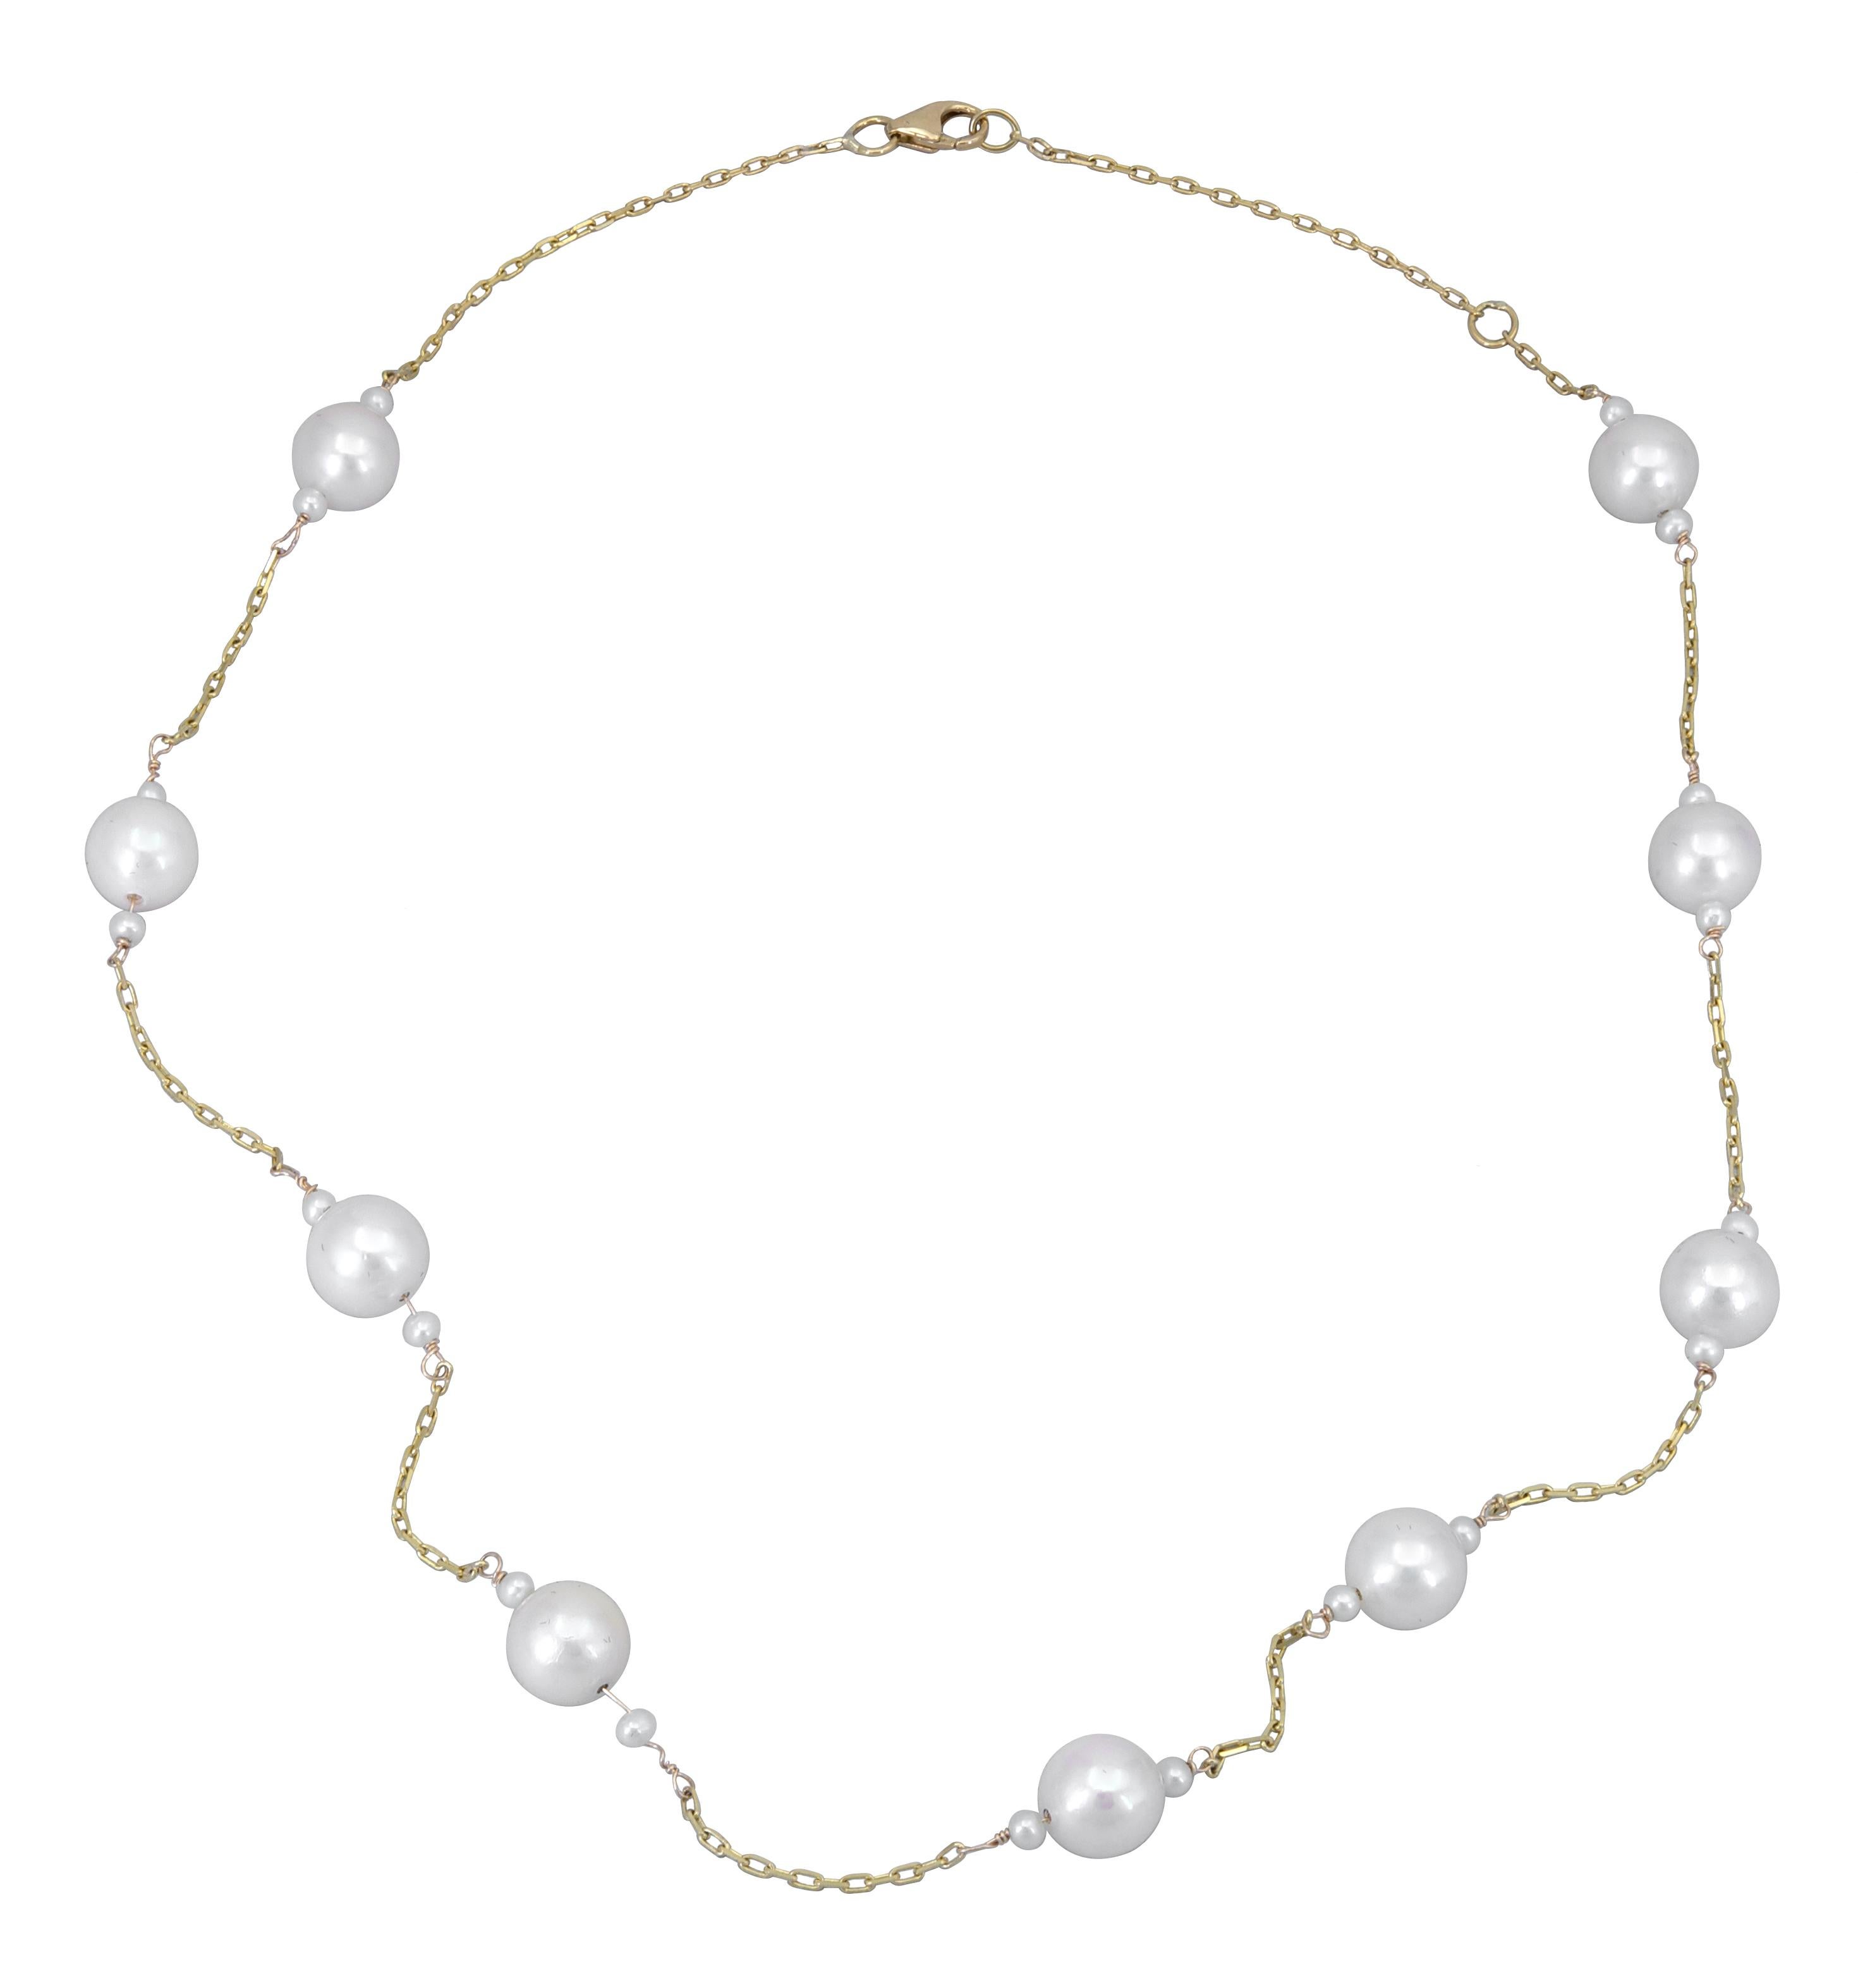 A stylish and simple necklace showcasing nine 7mm pearls, in-between seed pearls, spaced evenly in a modern 18k yellow gold chain. 
1.25 inch spacing between each pearl.
15 inch length.